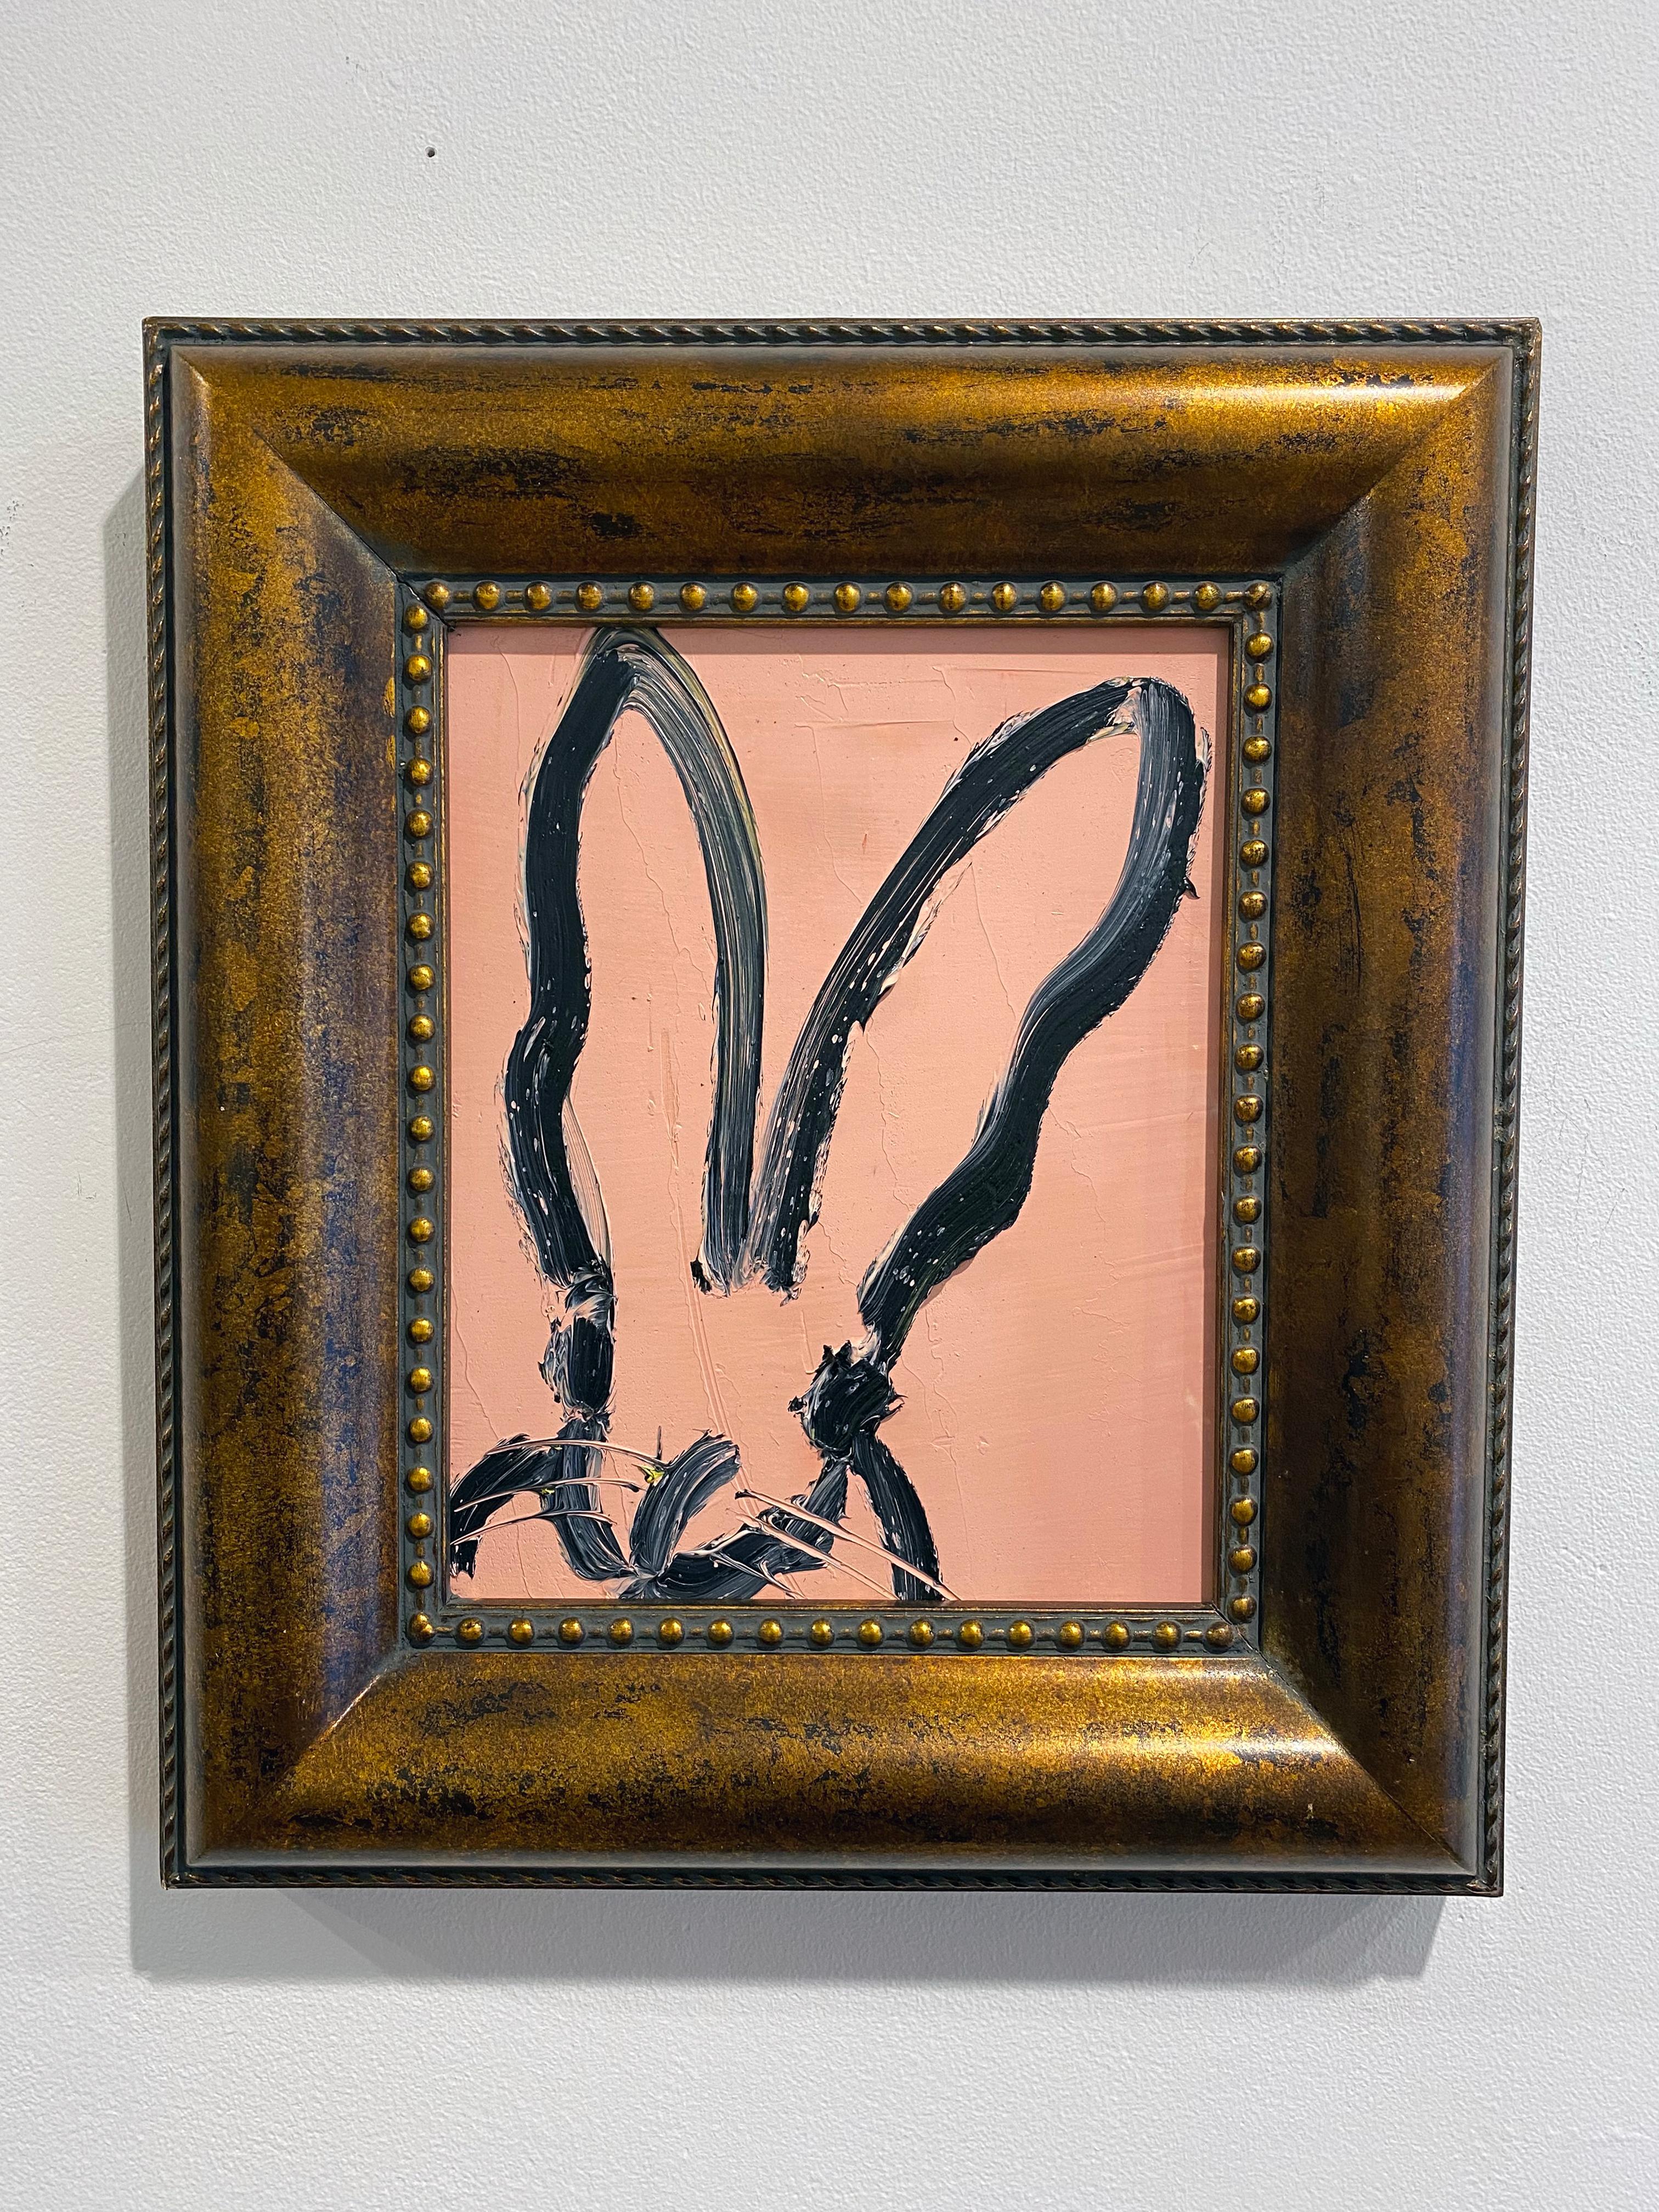 'Audrey Hepburn' by Hunt Slonem, 2020. Oil on wood, 10 x 8 in. Framed size is 15 x 13.5 in. This painting features Slonem's signature bunny outlined in black on a  pastel, classy pink background. Framed in a carved wood frame with antiqued gold